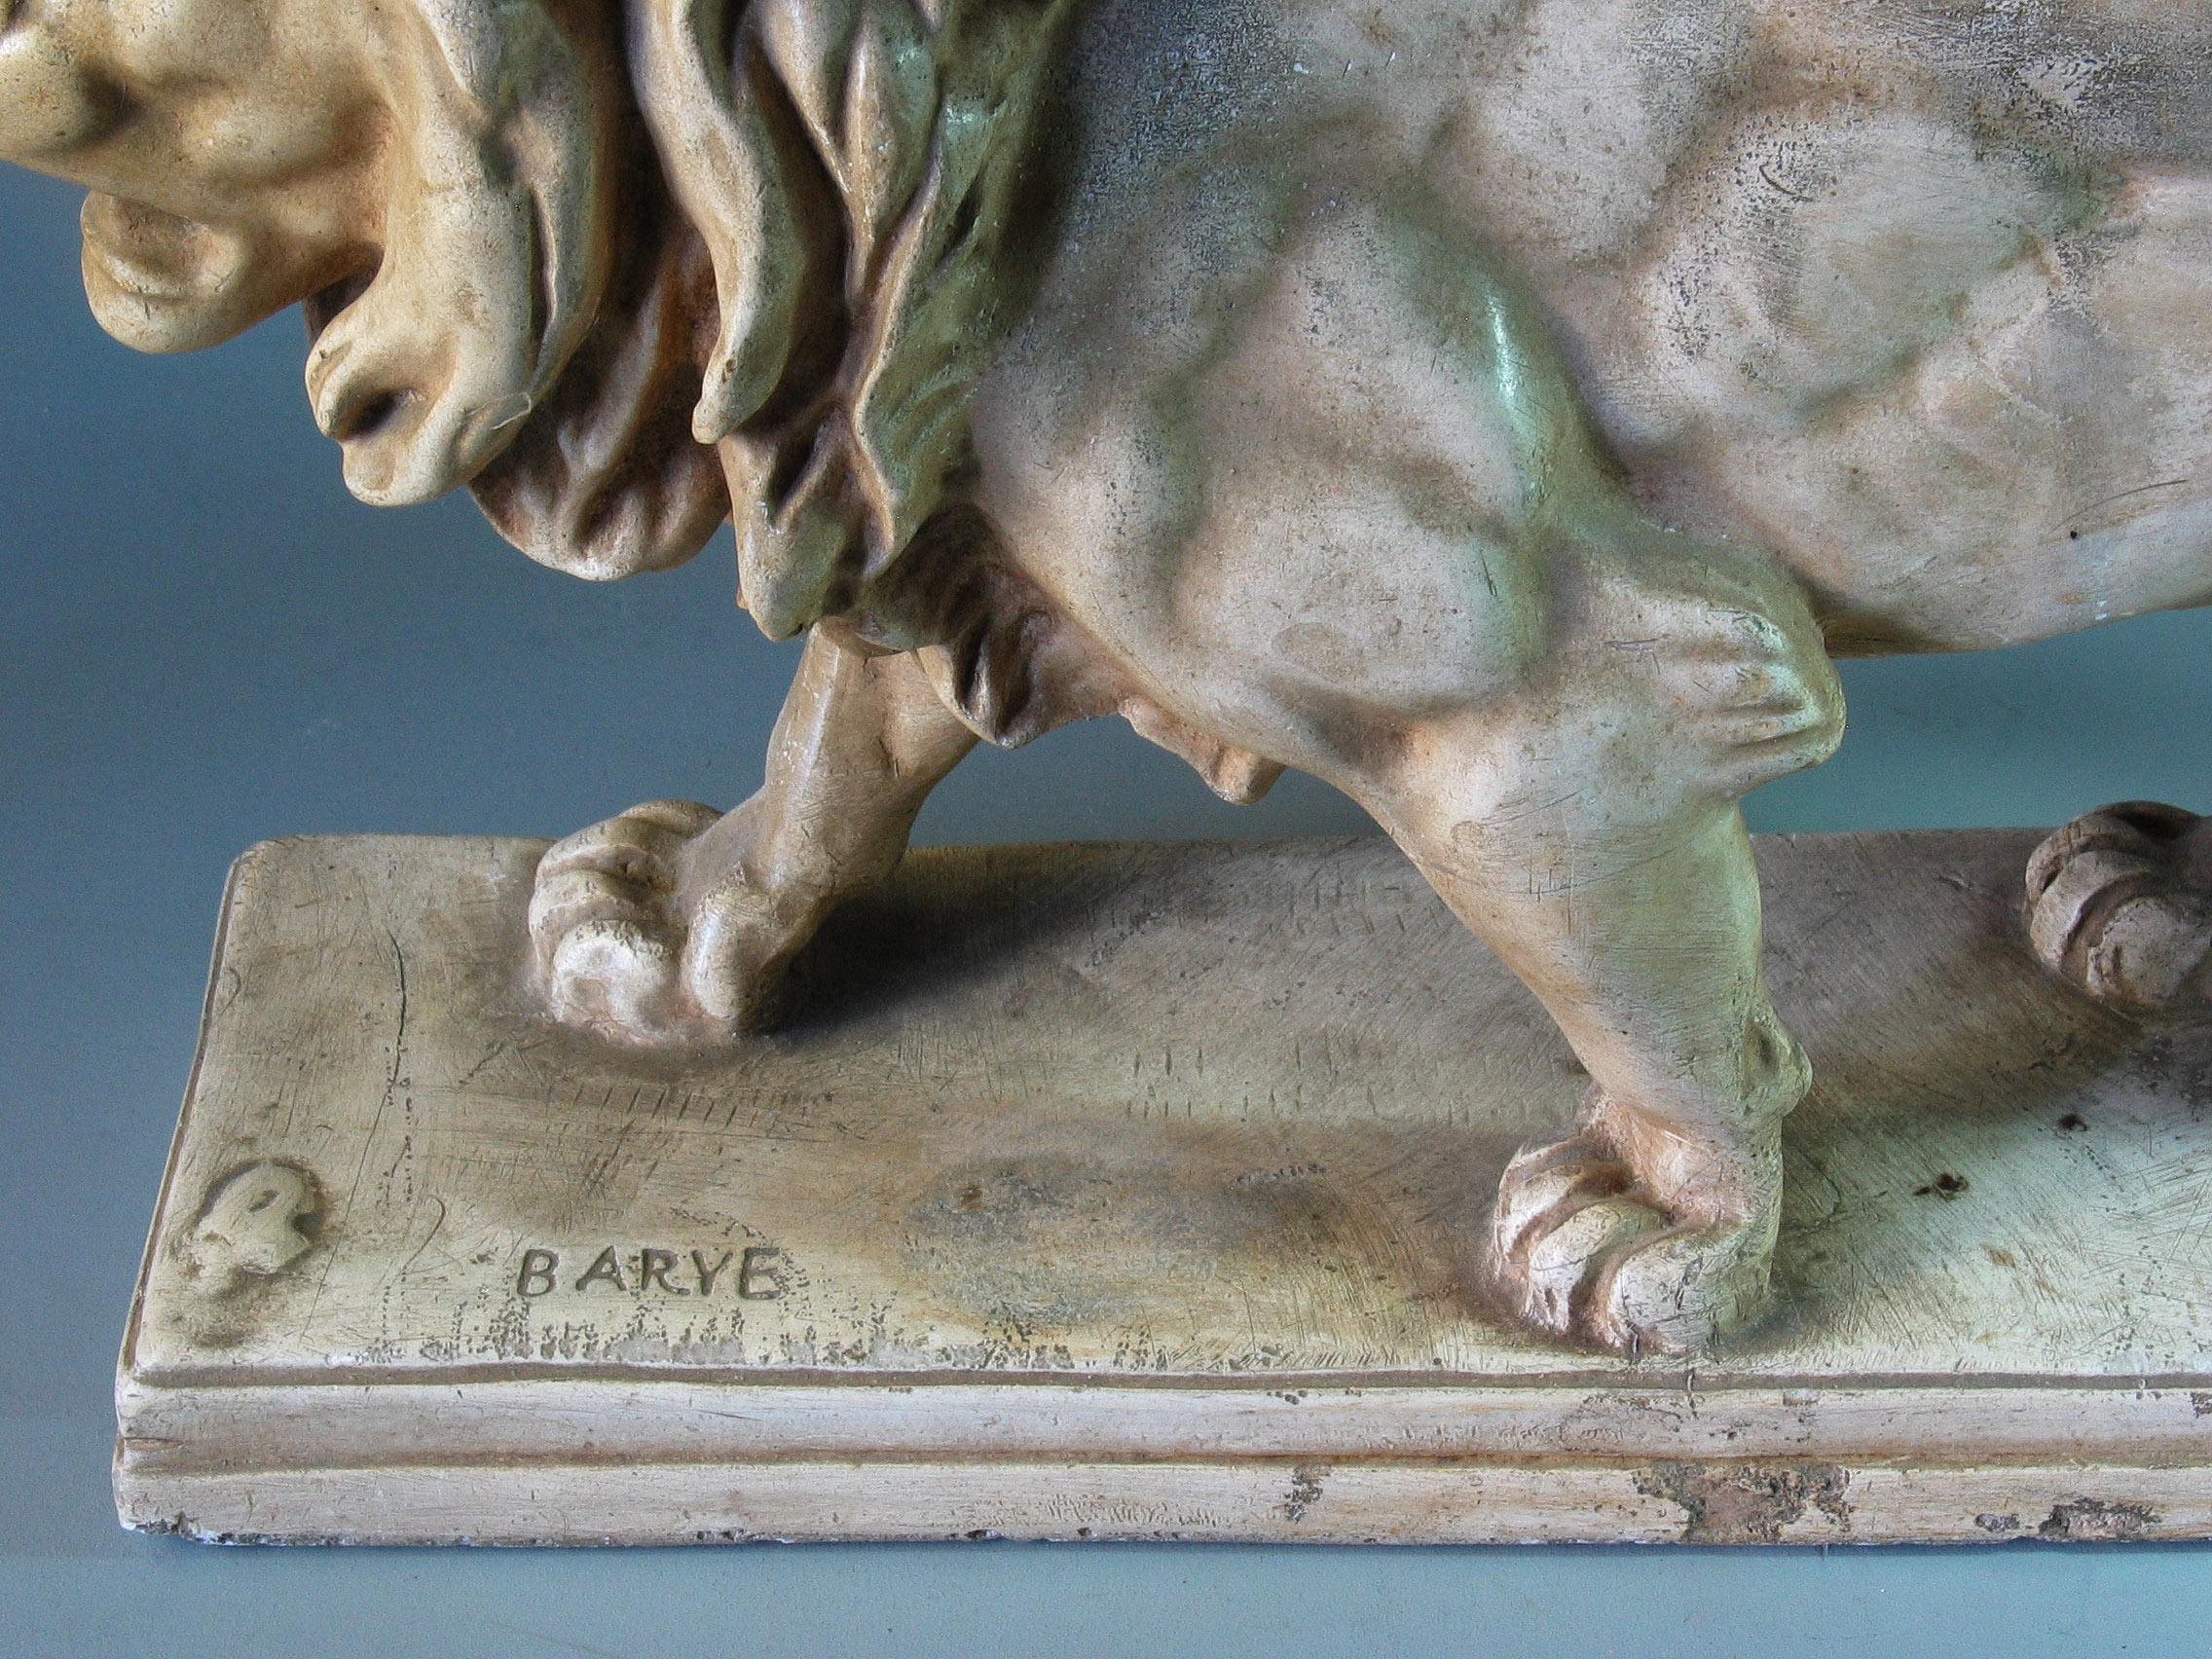 Hand-Carved Antoine-Louis Barye 'French' Lion Qui Marche 'Walking Lion', 19th Century